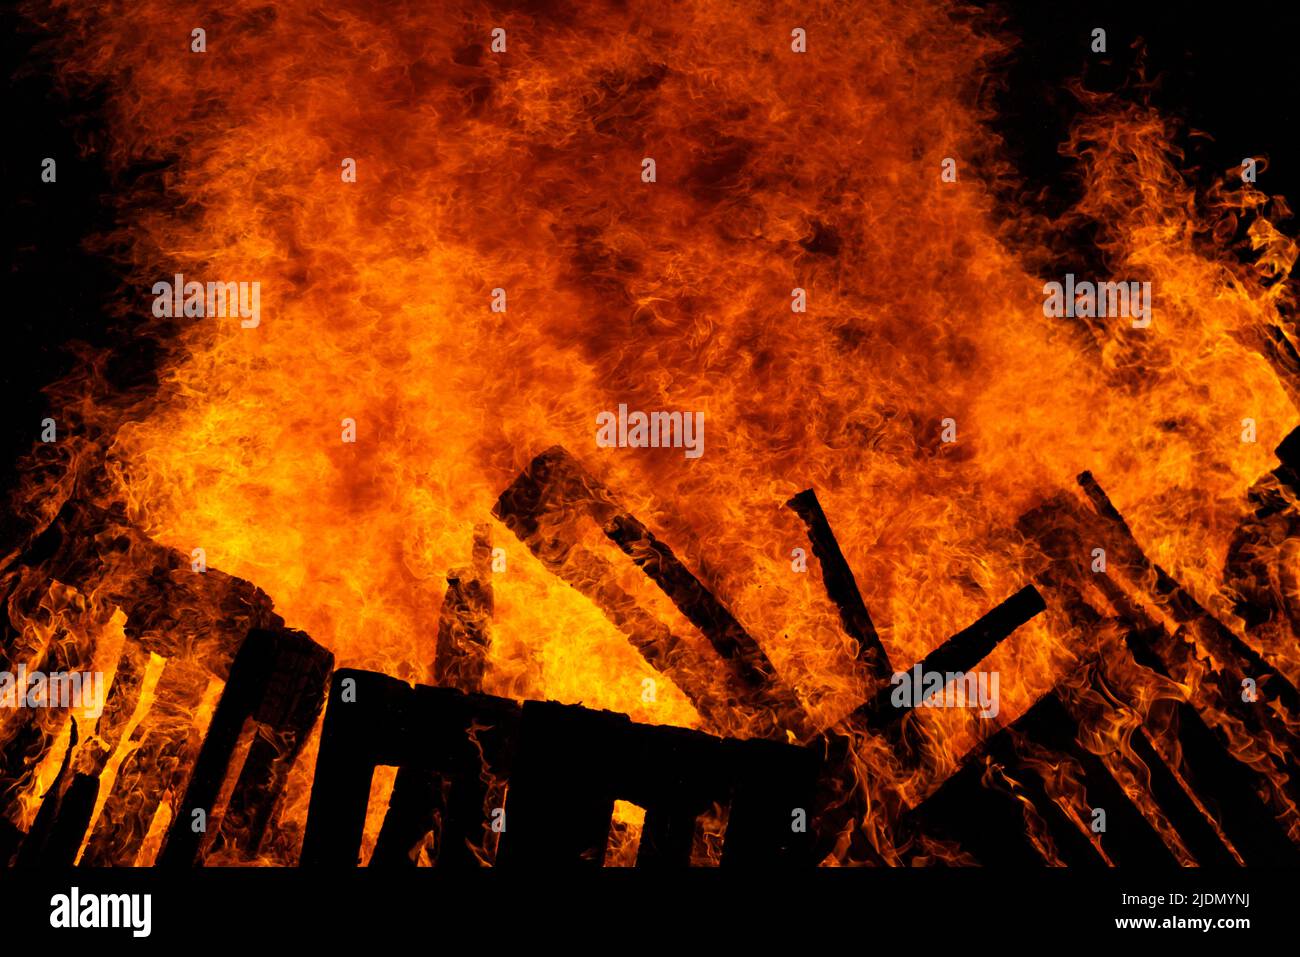 Fire flames background. Red hot flames of fire Stock Photo